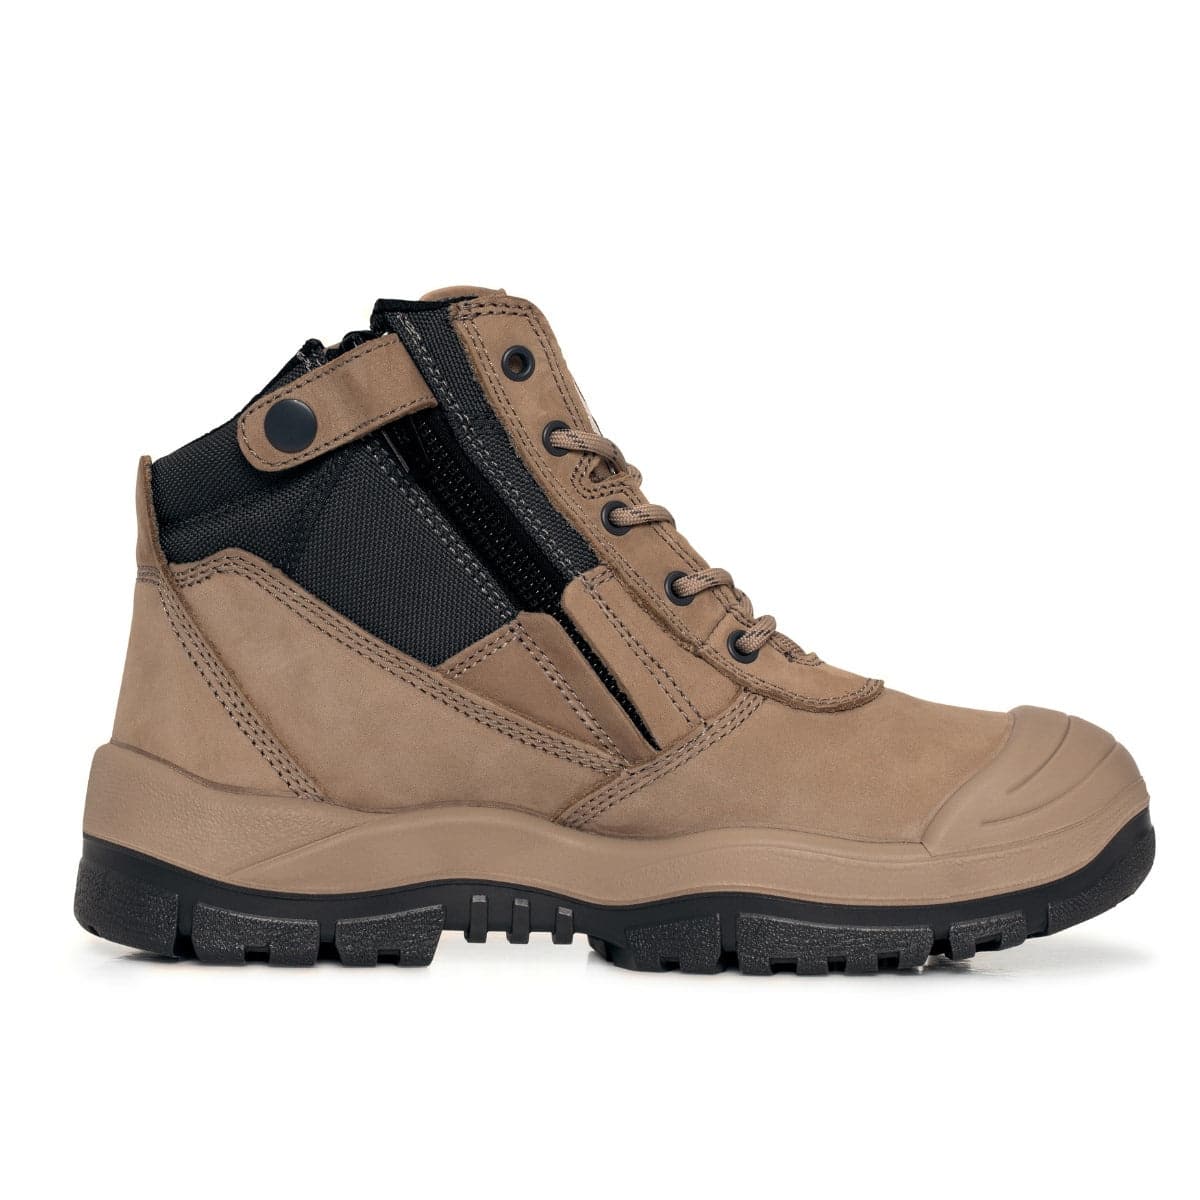 Mongrel Stone ZipSider Boot with Scuff Cap 461060